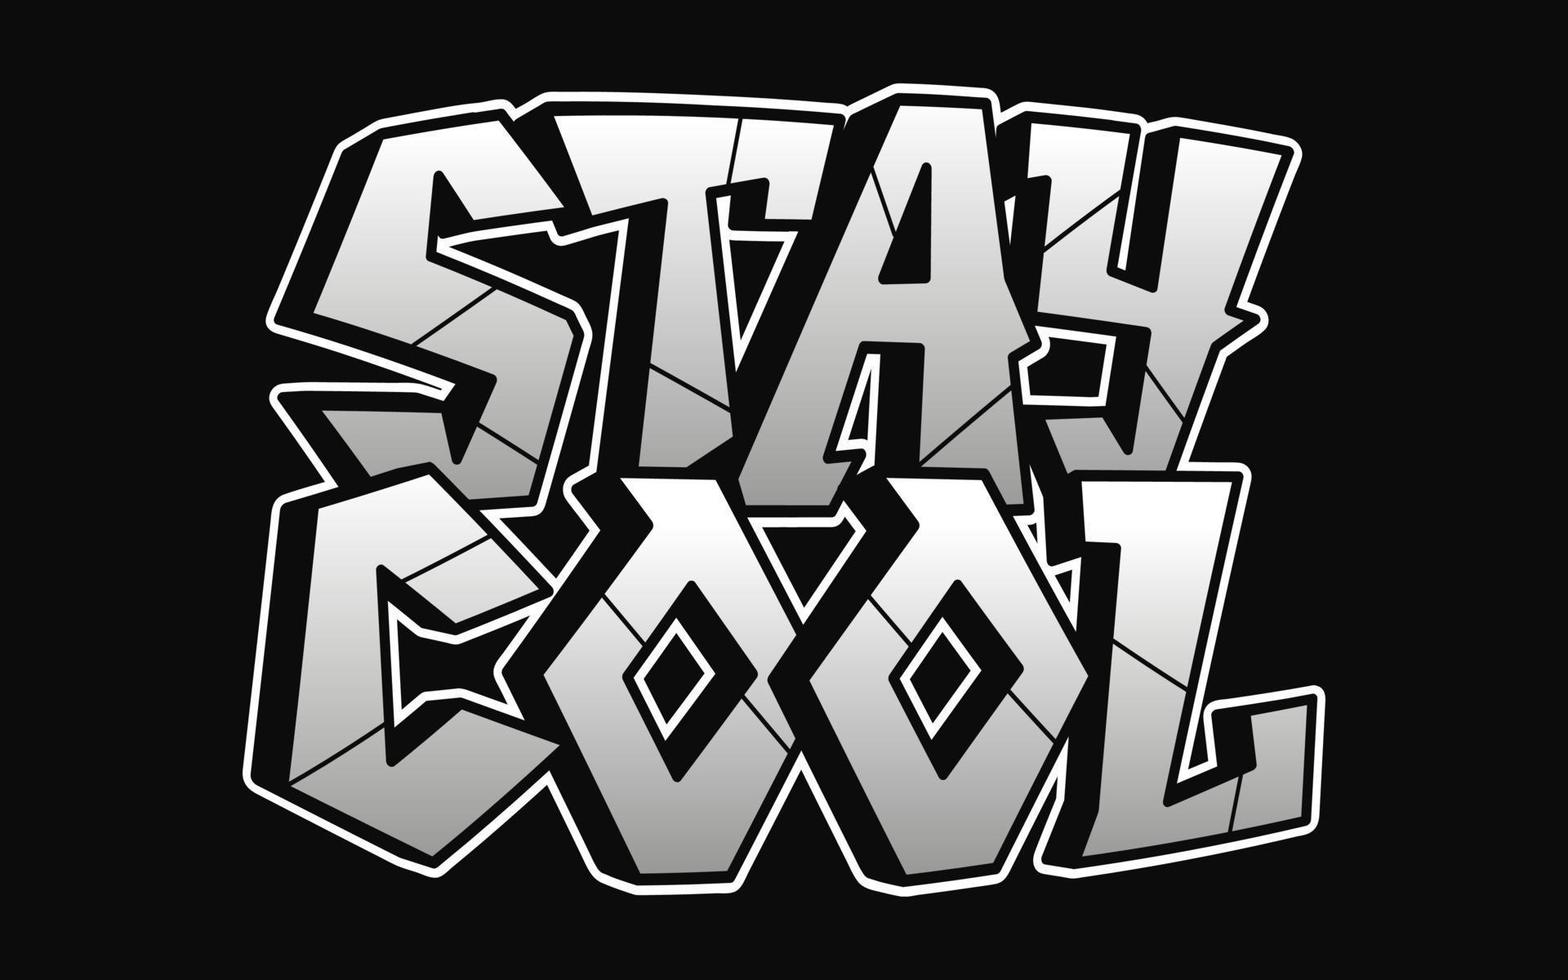 Stay cool word graffiti style letters.Vector hand drawn doodle cartoon logo illustration.Funny cool stay cool letters, fashion, graffiti style print for t-shirt, poster concept vector